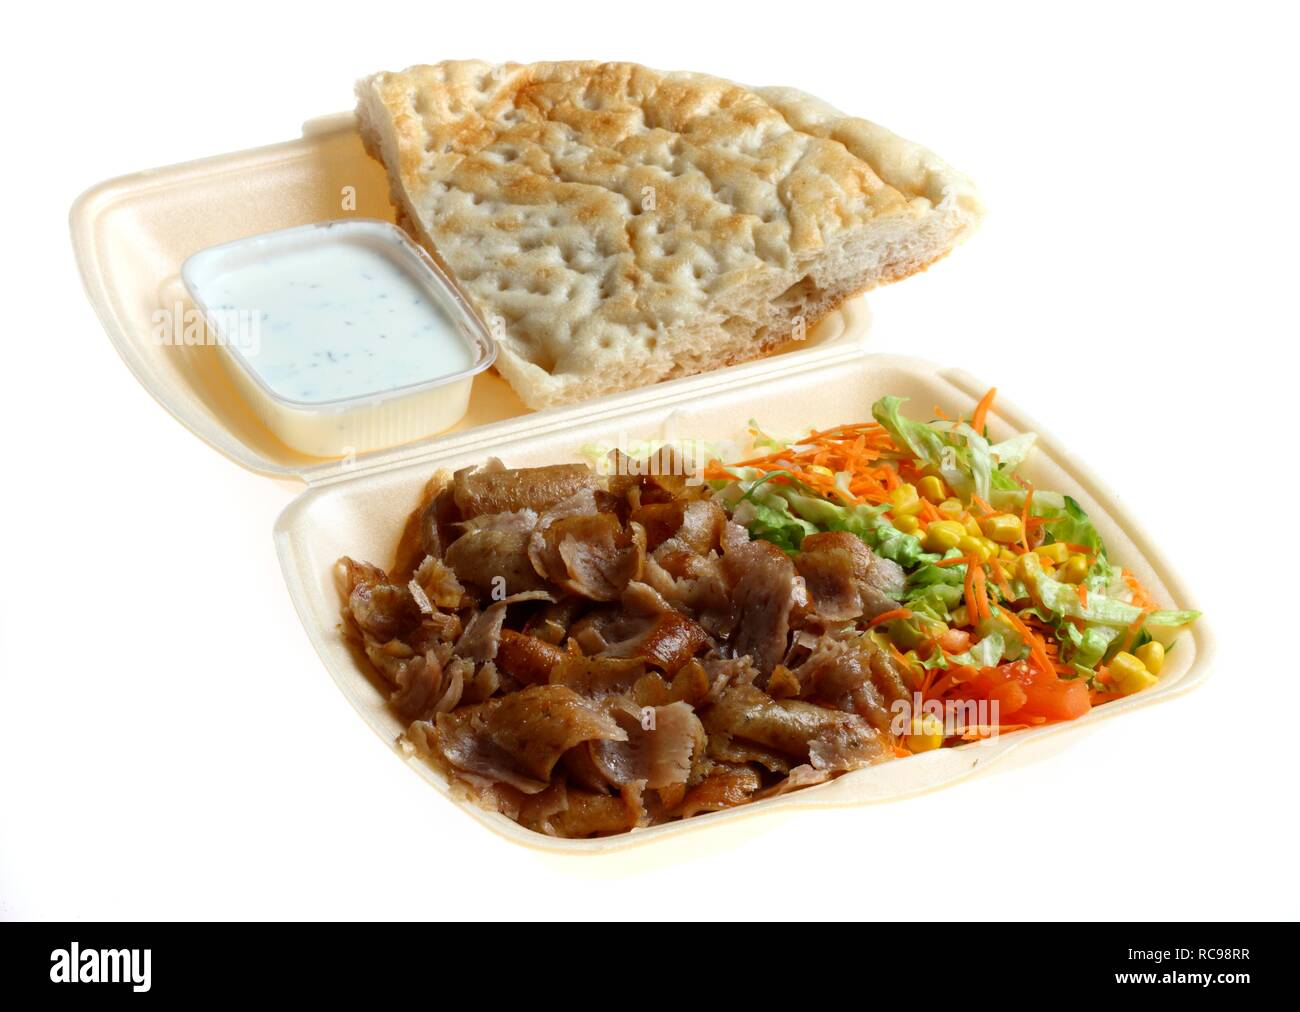 Fast food, doner kebab plate, with doner meat, salad, garlic-yogurt sauce and pita bread in plastic takeaway packaging Stock Photo